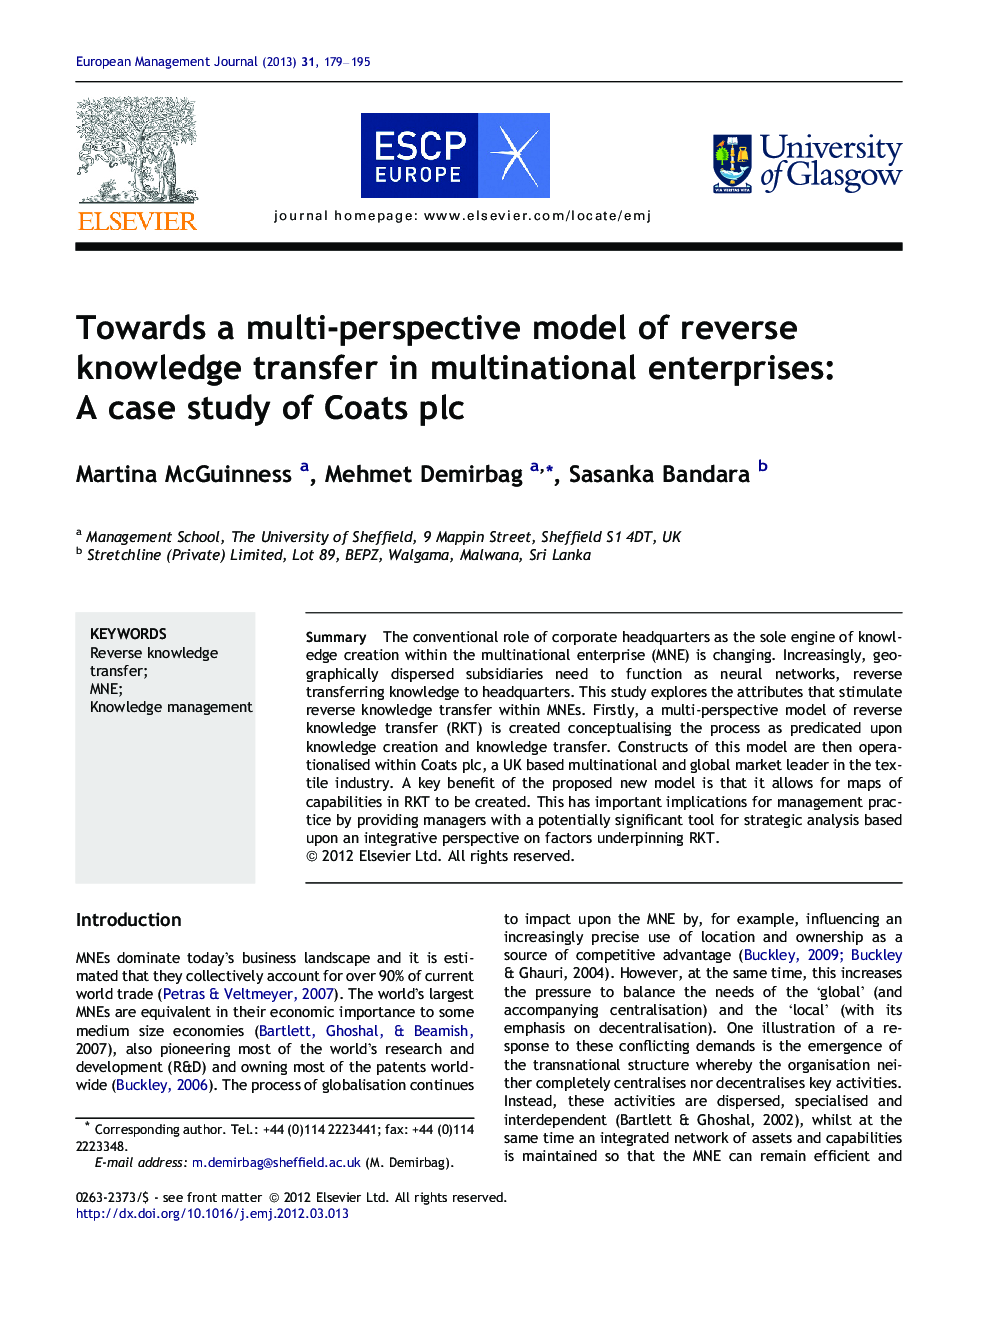 Towards a multi-perspective model of reverse knowledge transfer in multinational enterprises: A case study of Coats plc